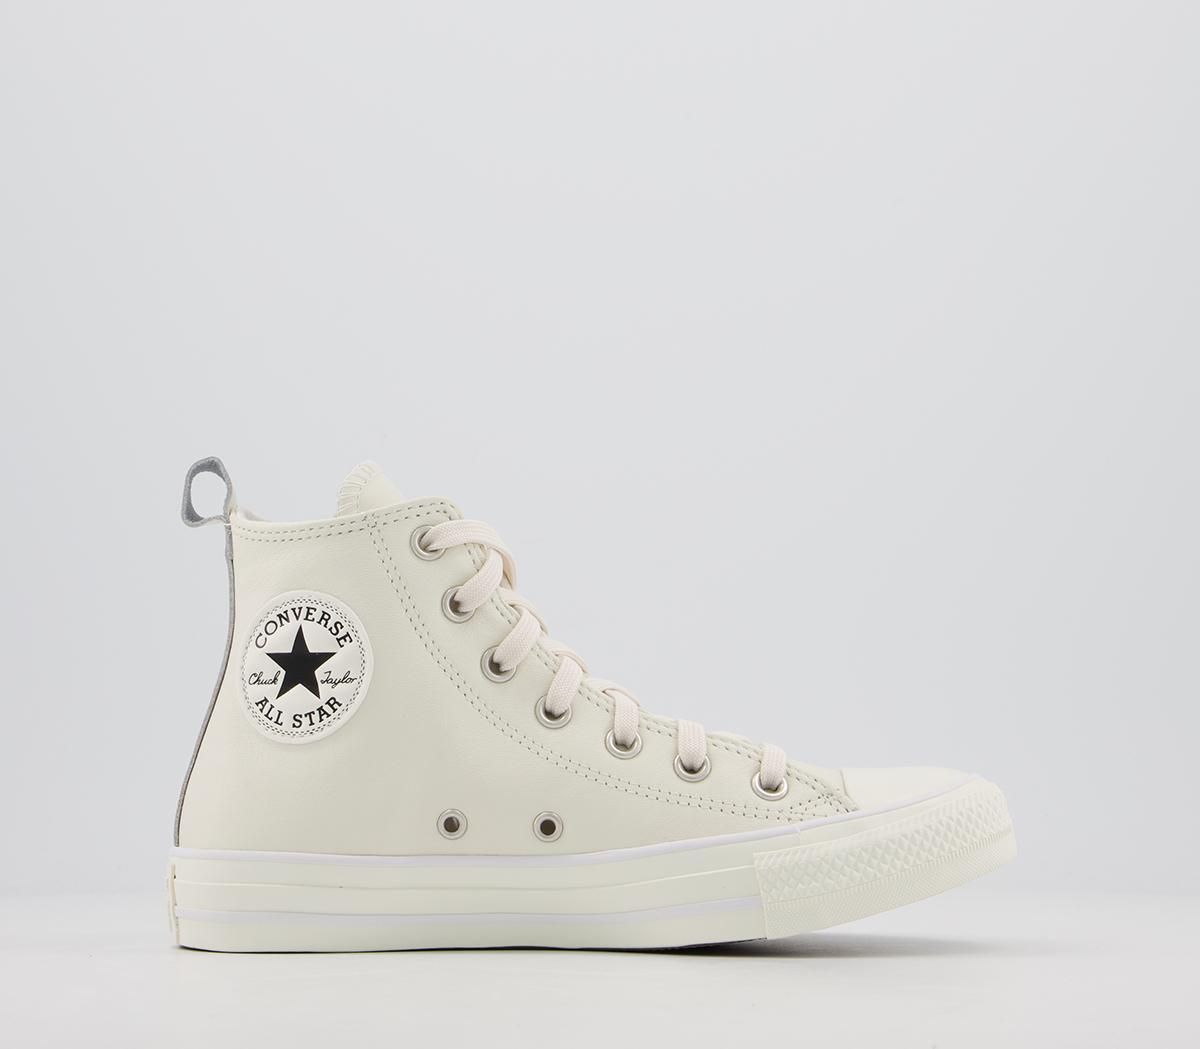 converse all star low egret white rainbow exclusive